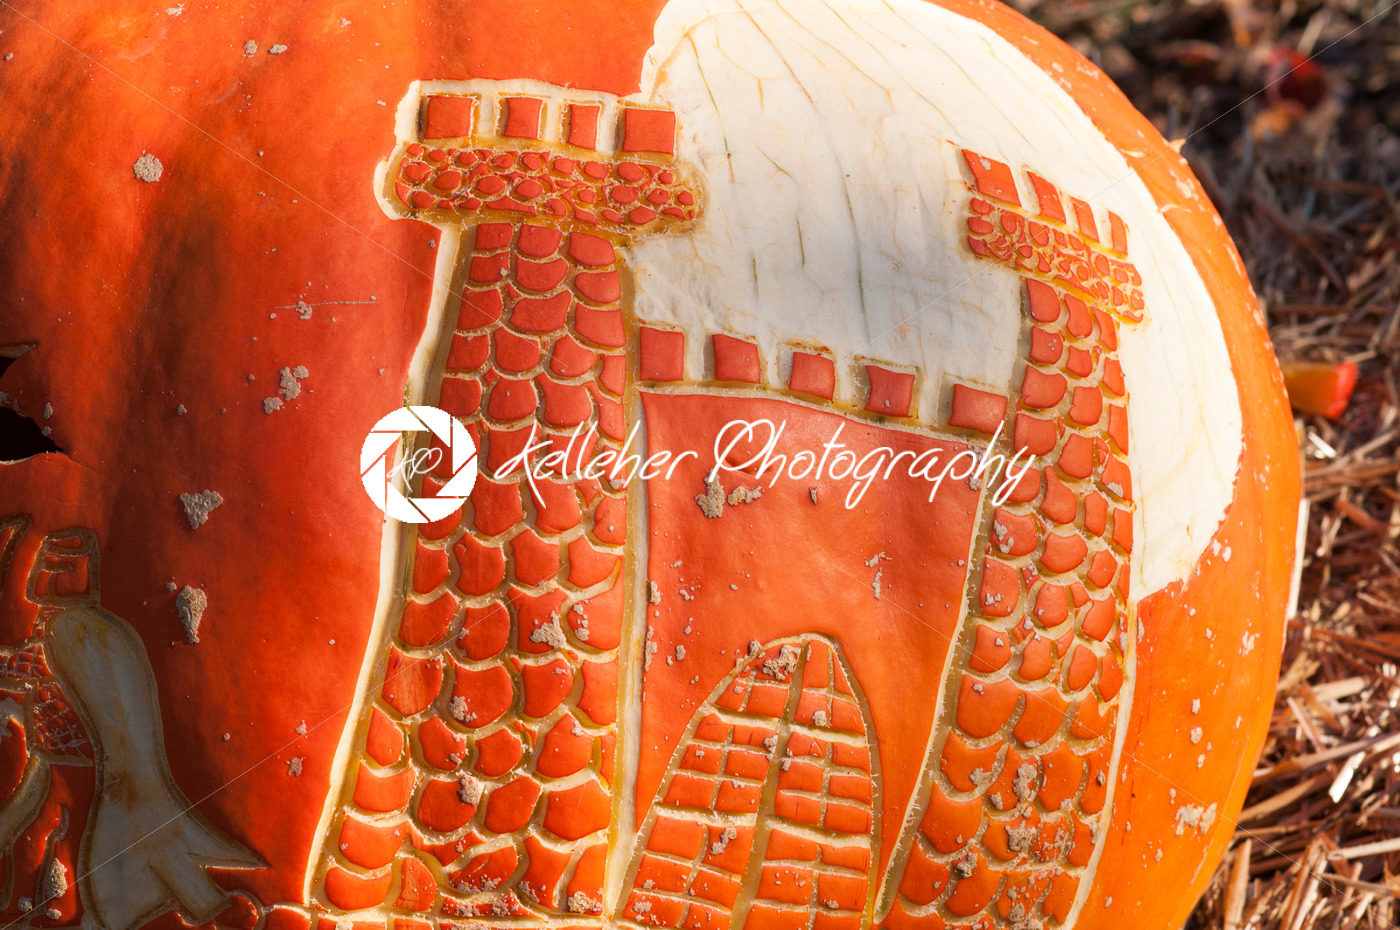 CHADDS FORD, PA – OCTOBER 26: Castle Pumpkin at The Great Pumpkin Carve carving contest on October 26, 2013 - Kelleher Photography Store